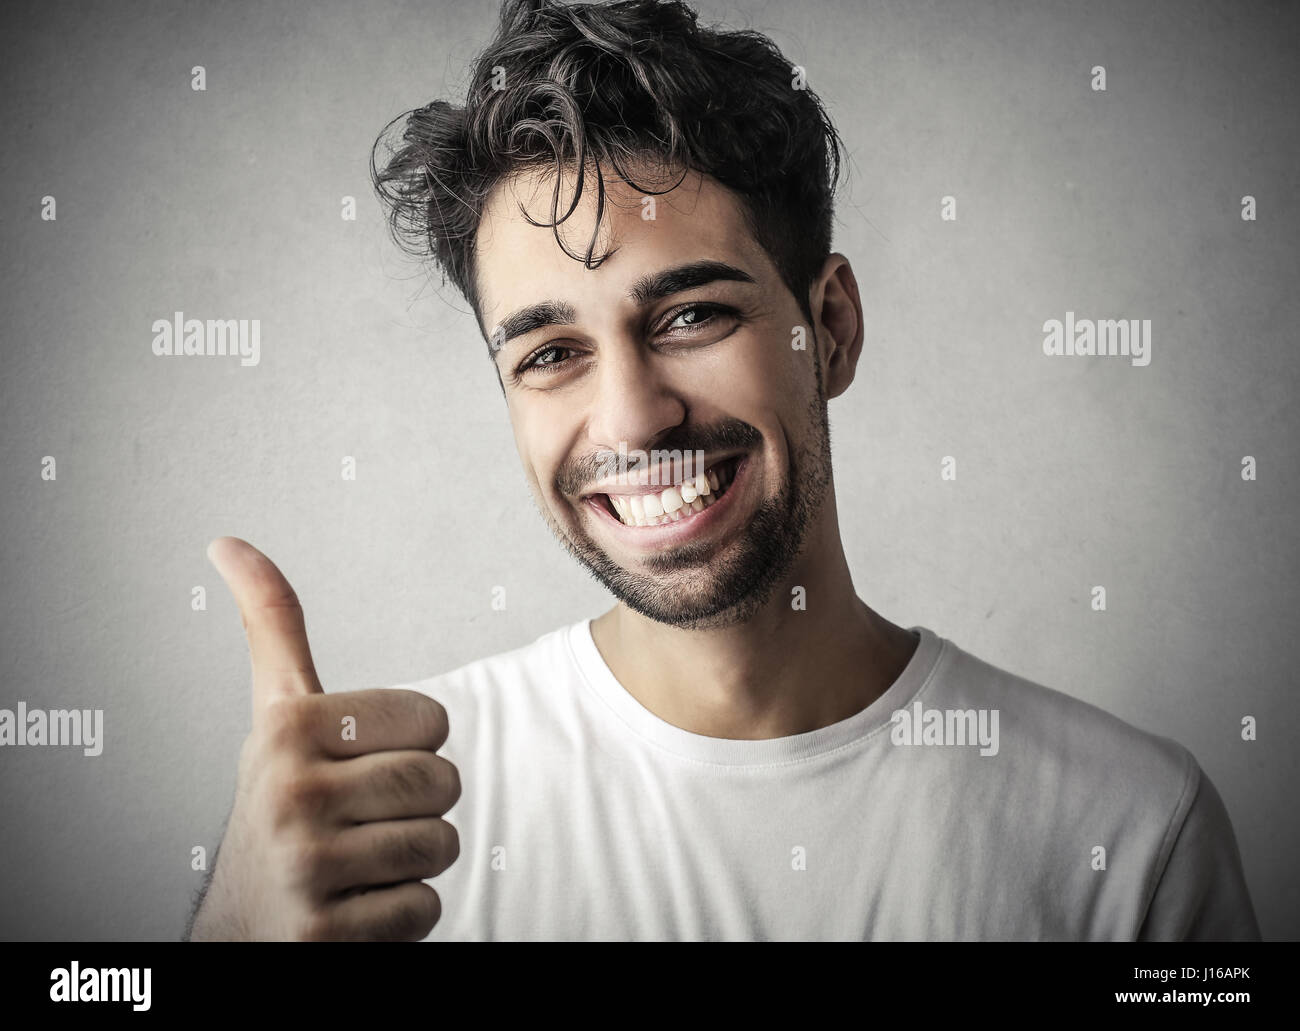 Handsome man making like sign Stock Photo